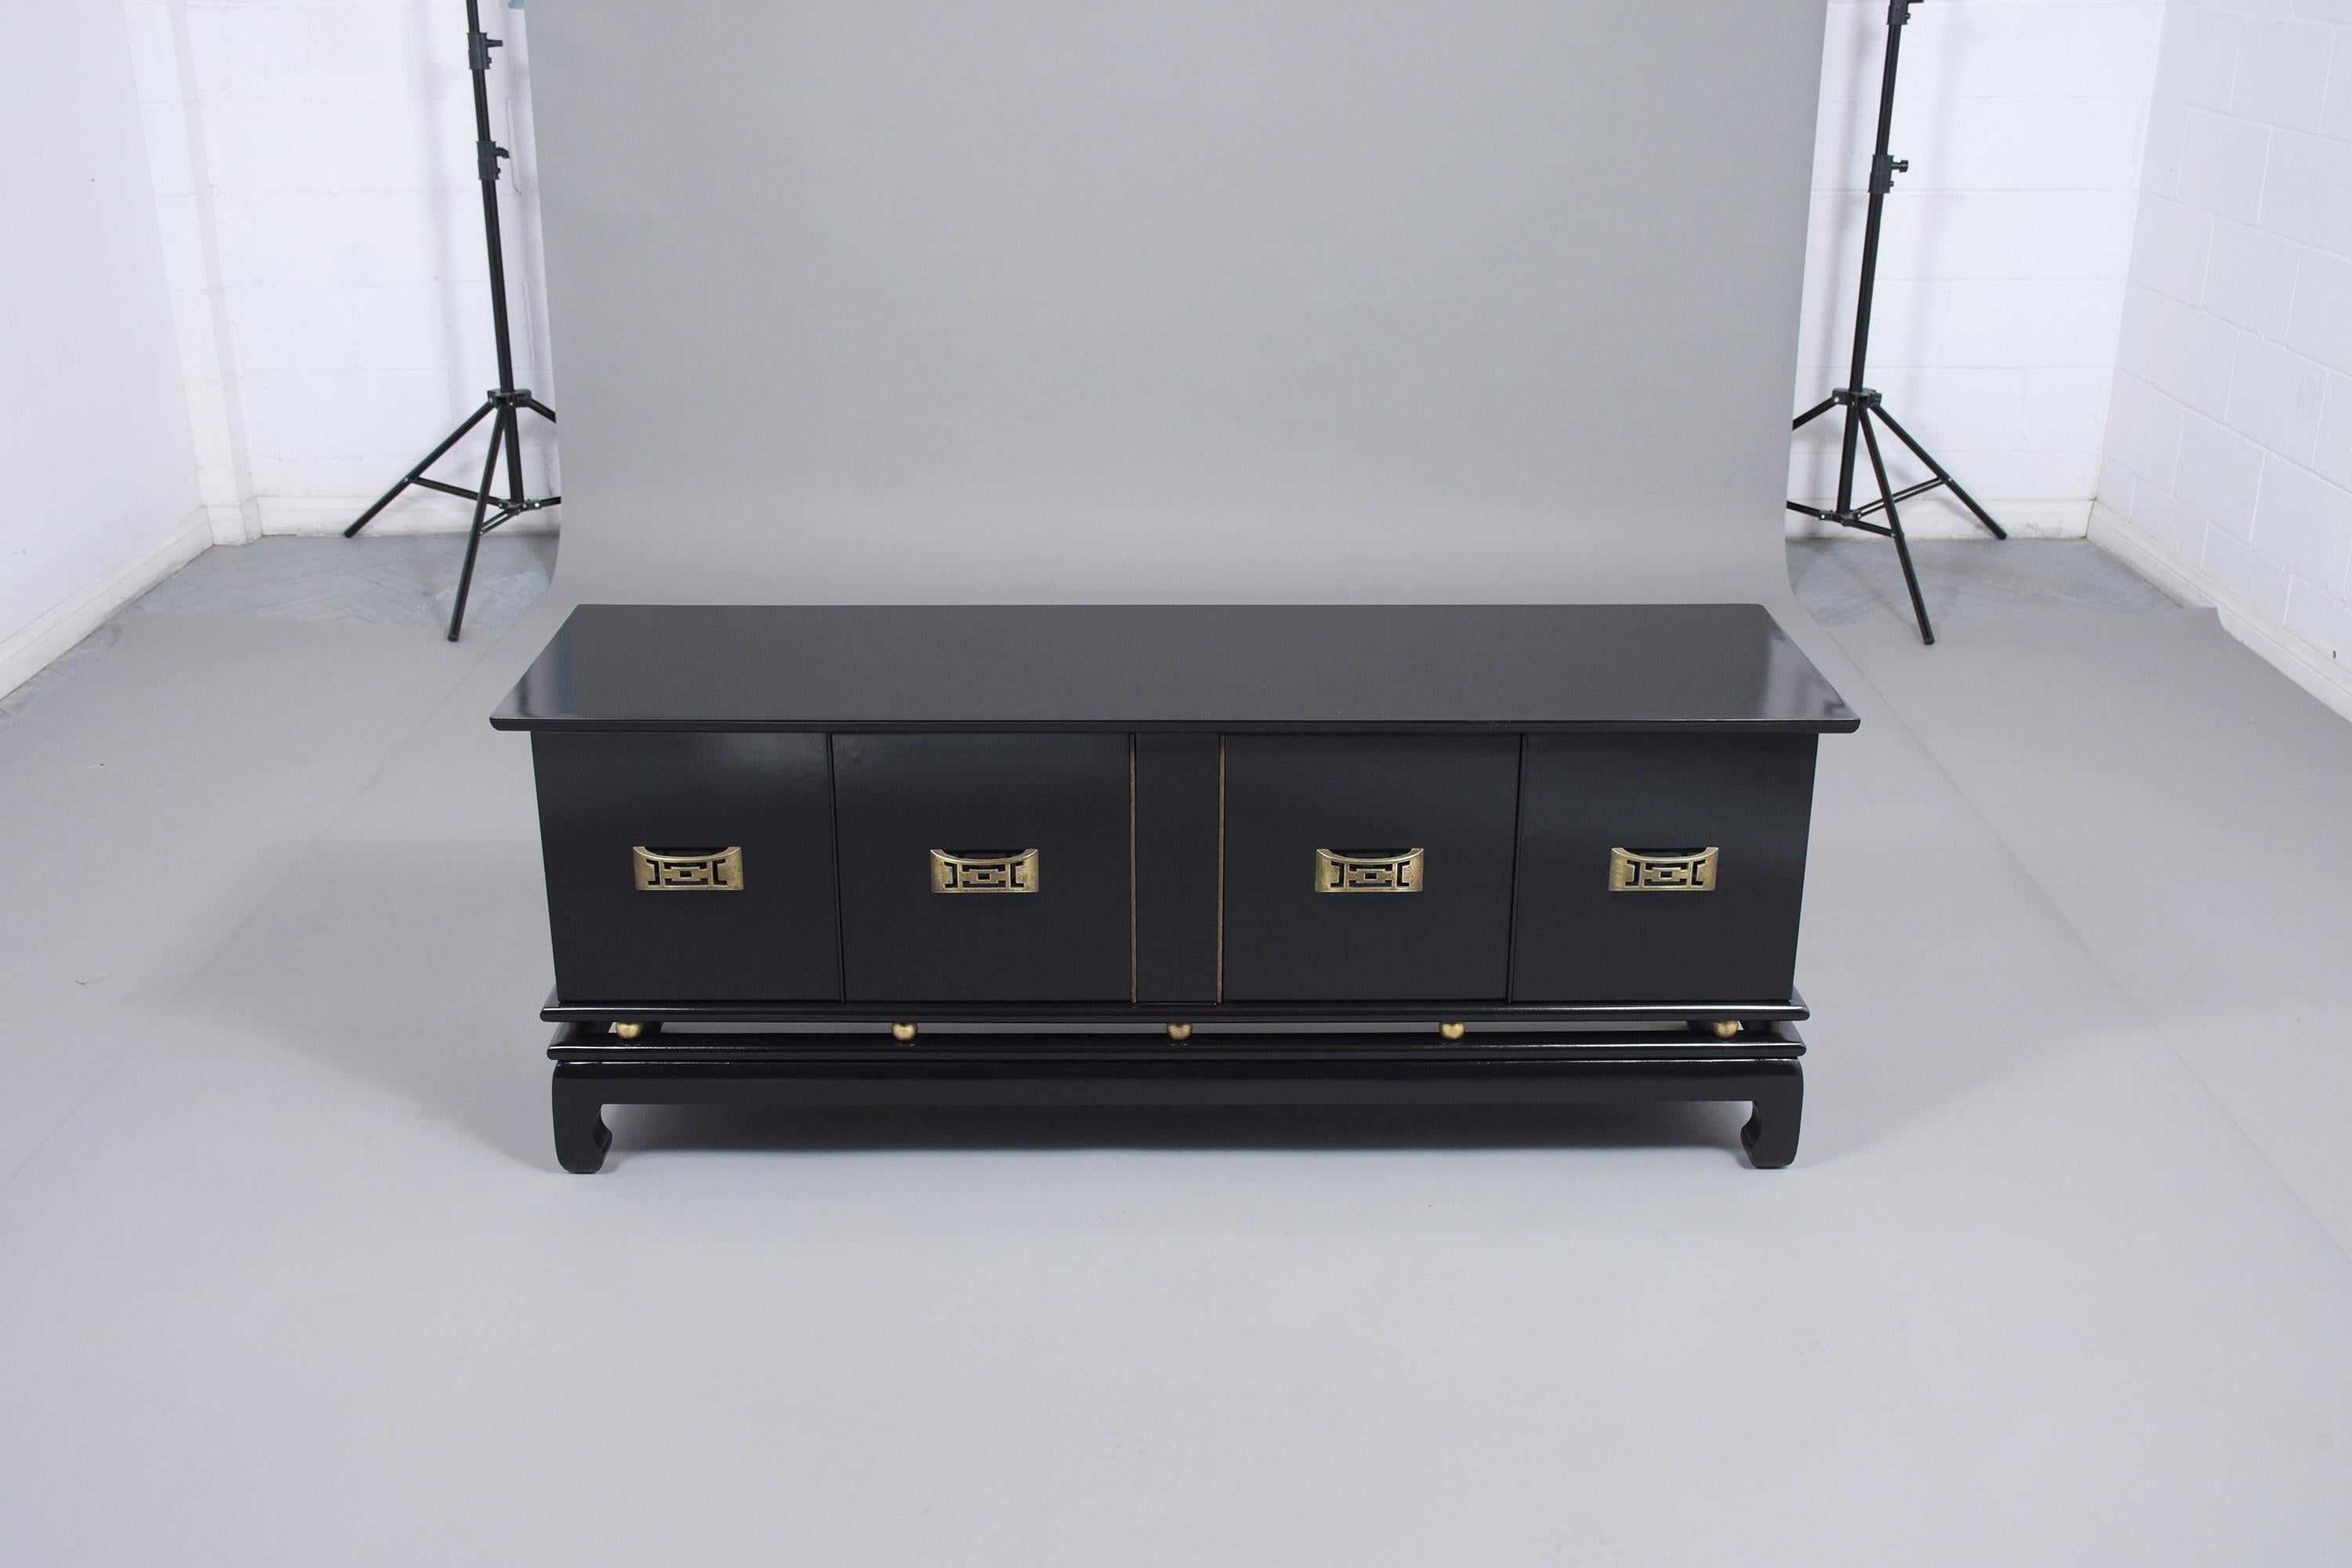 This vintage low mid-century modern credenza has been newly restored and features a newly ebonized lacquered finish. The cabinet comes with four cabinet doors with unique brass handles, two large interior shelves for additional storage, and rests on